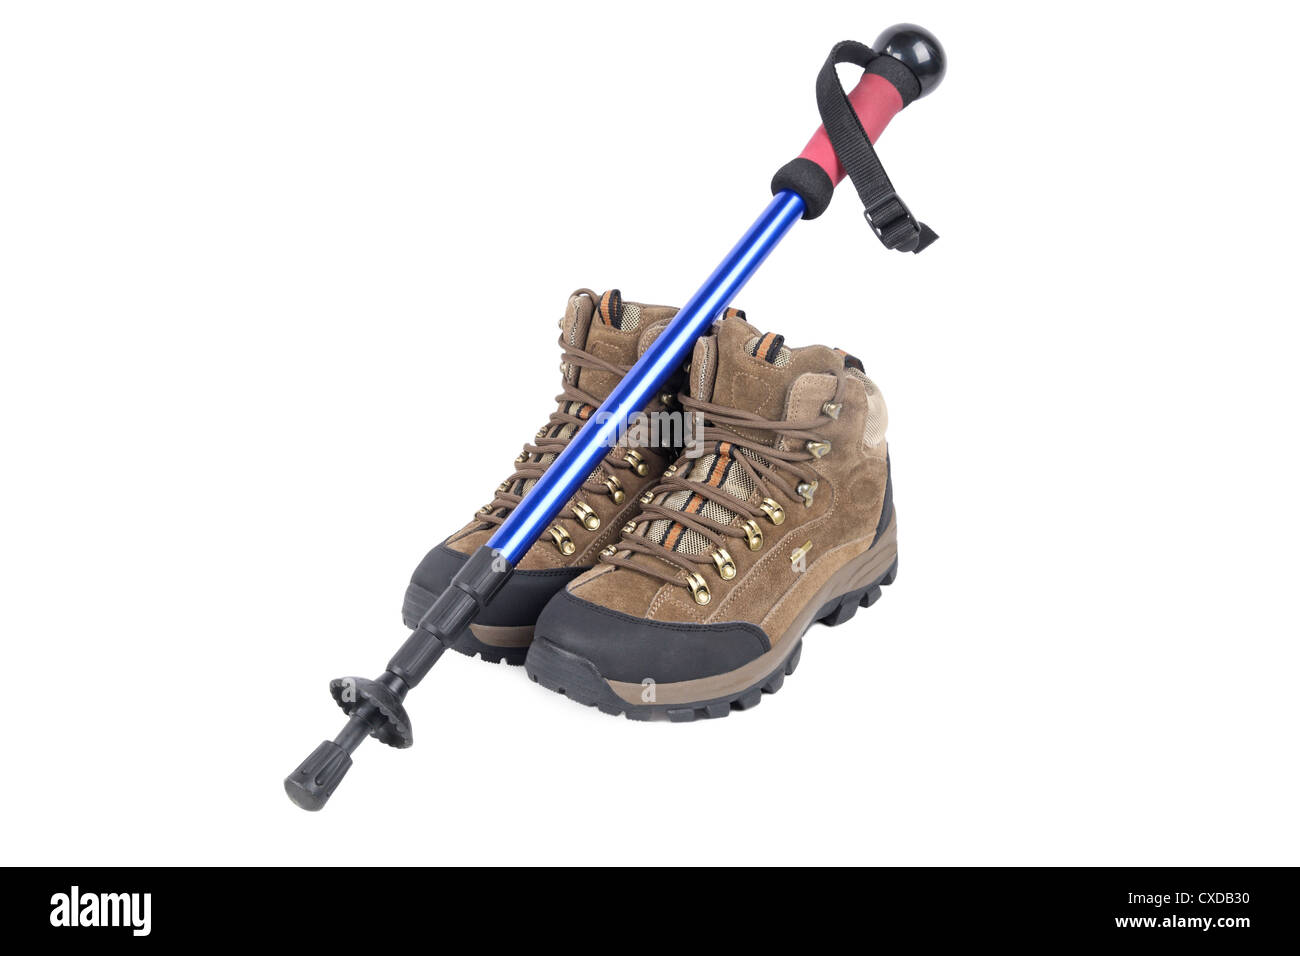 trekking shoes and hiking pole Stock Photo